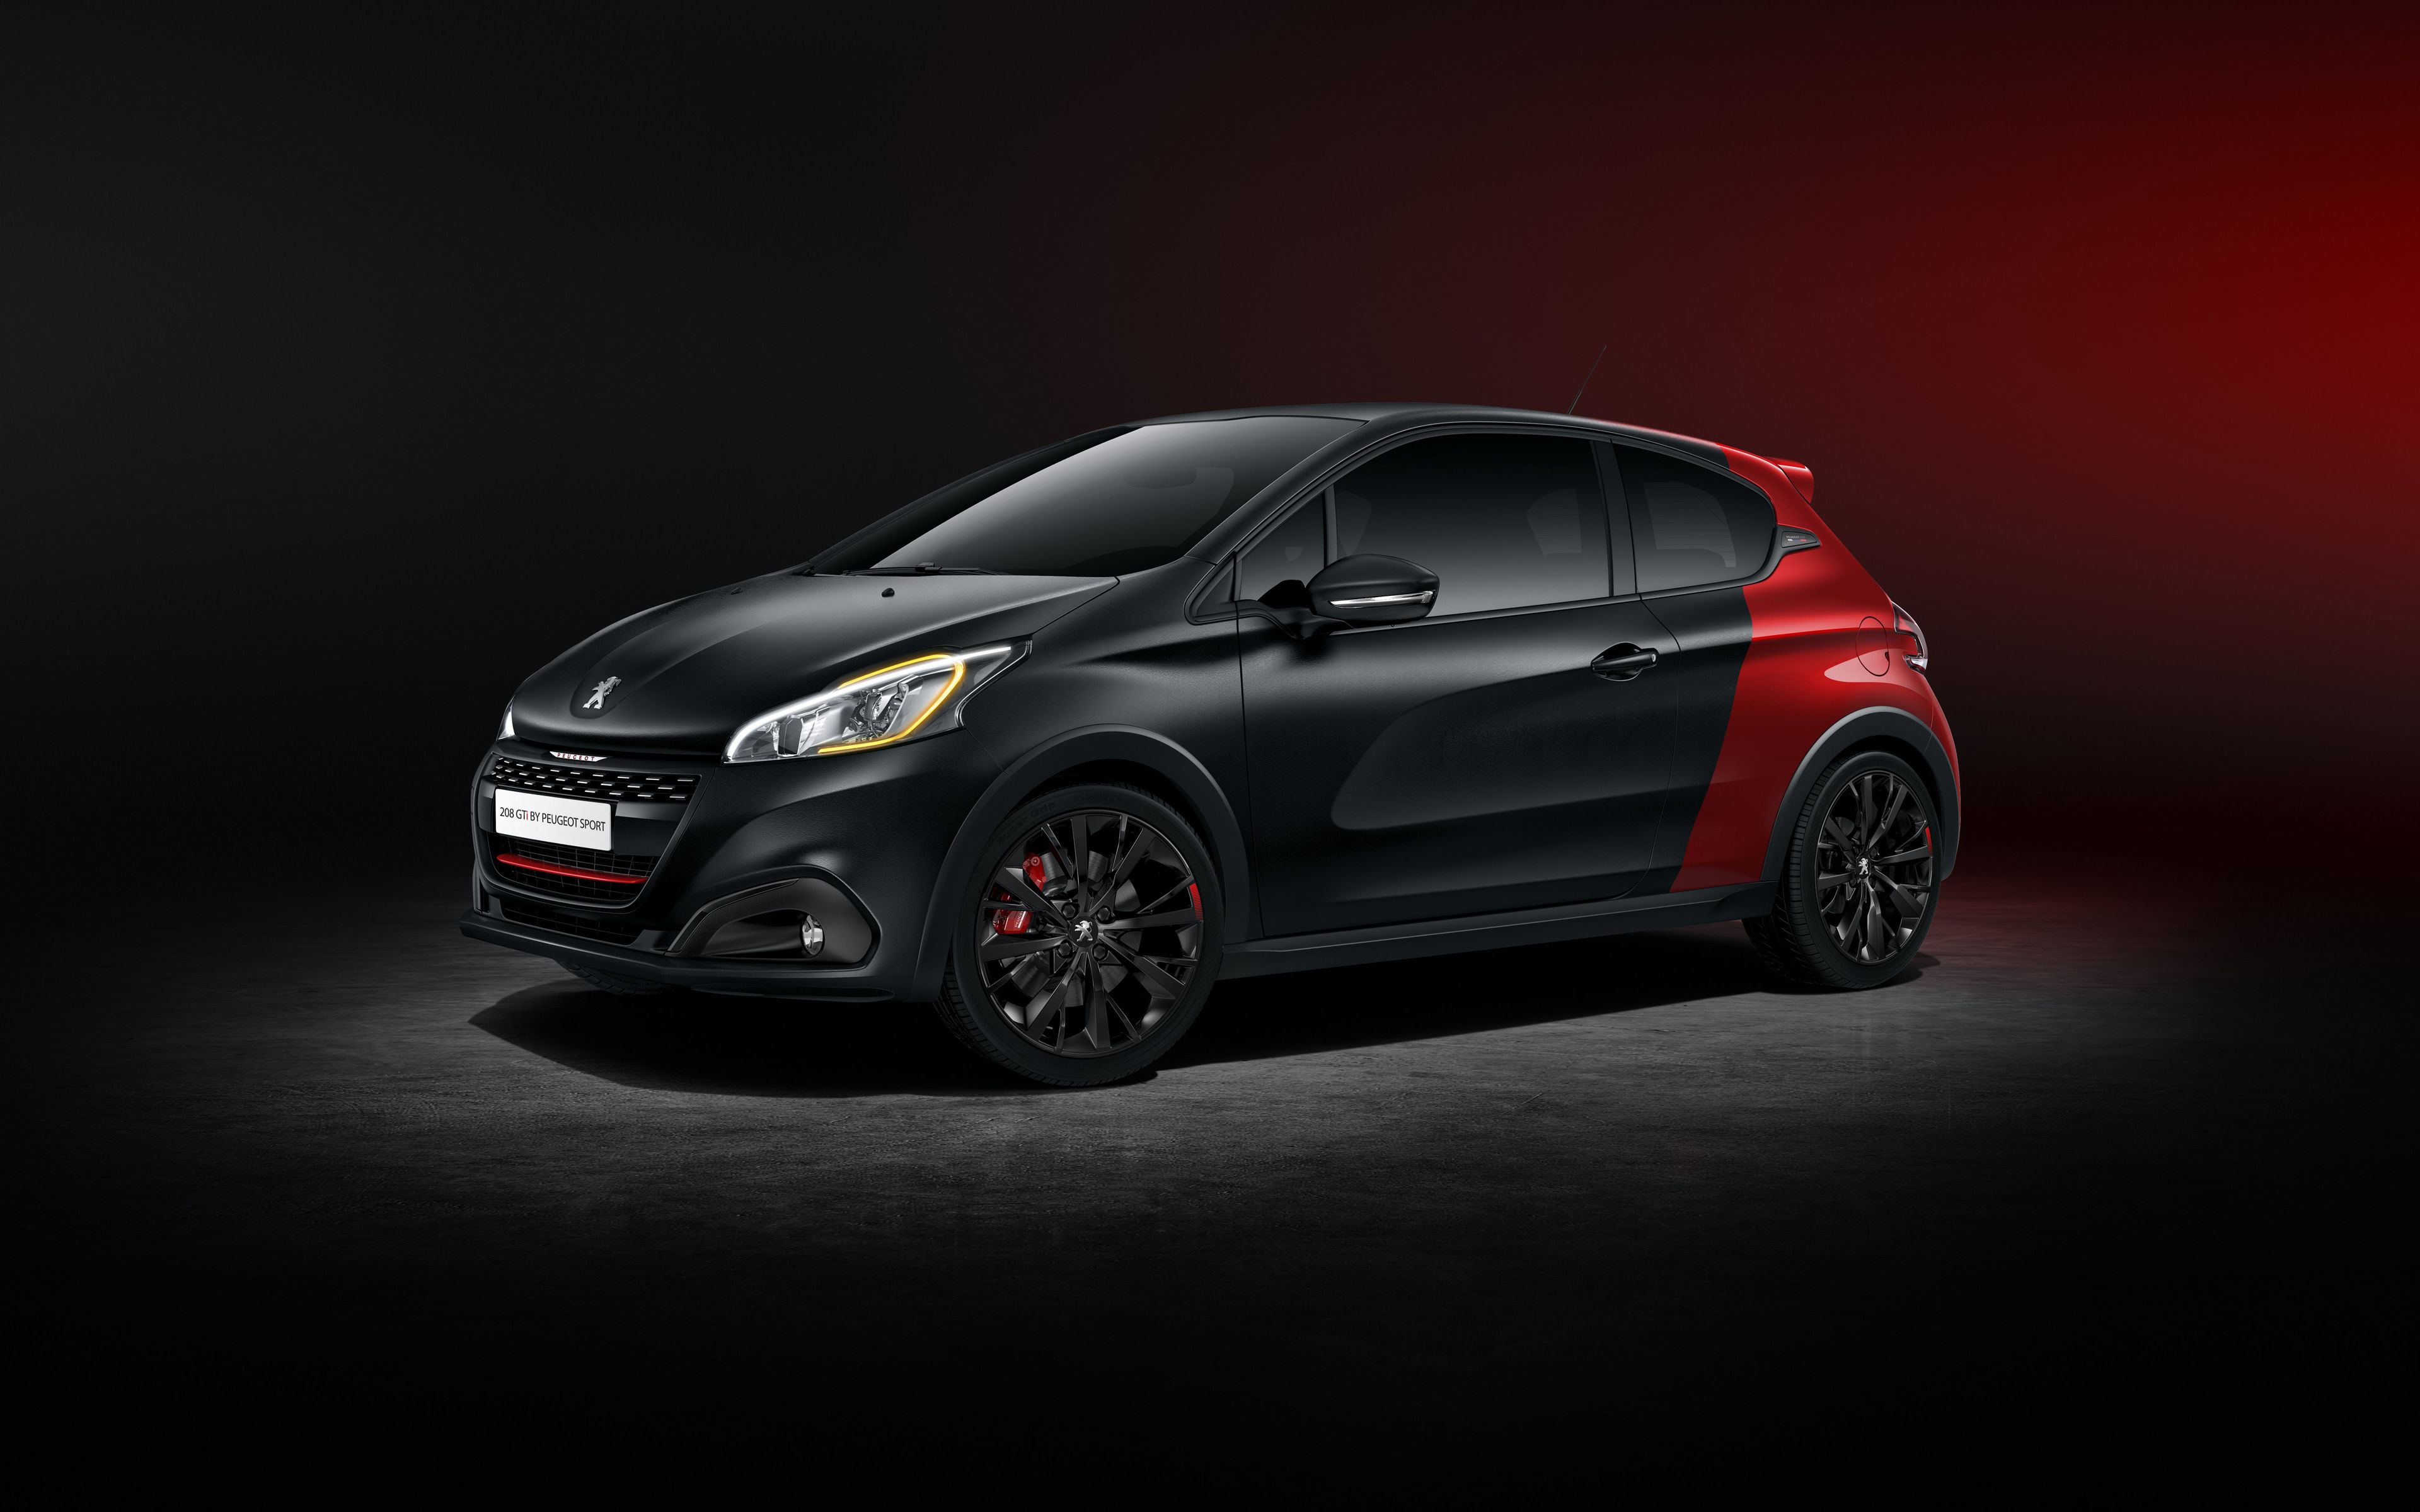 Download wallpaper Peugeot 208 GTi Sport, exterior, front view, hatchback, new red 208 GTi, Peugeot for desktop with resolution 3840x2400. High Quality HD picture wallpaper